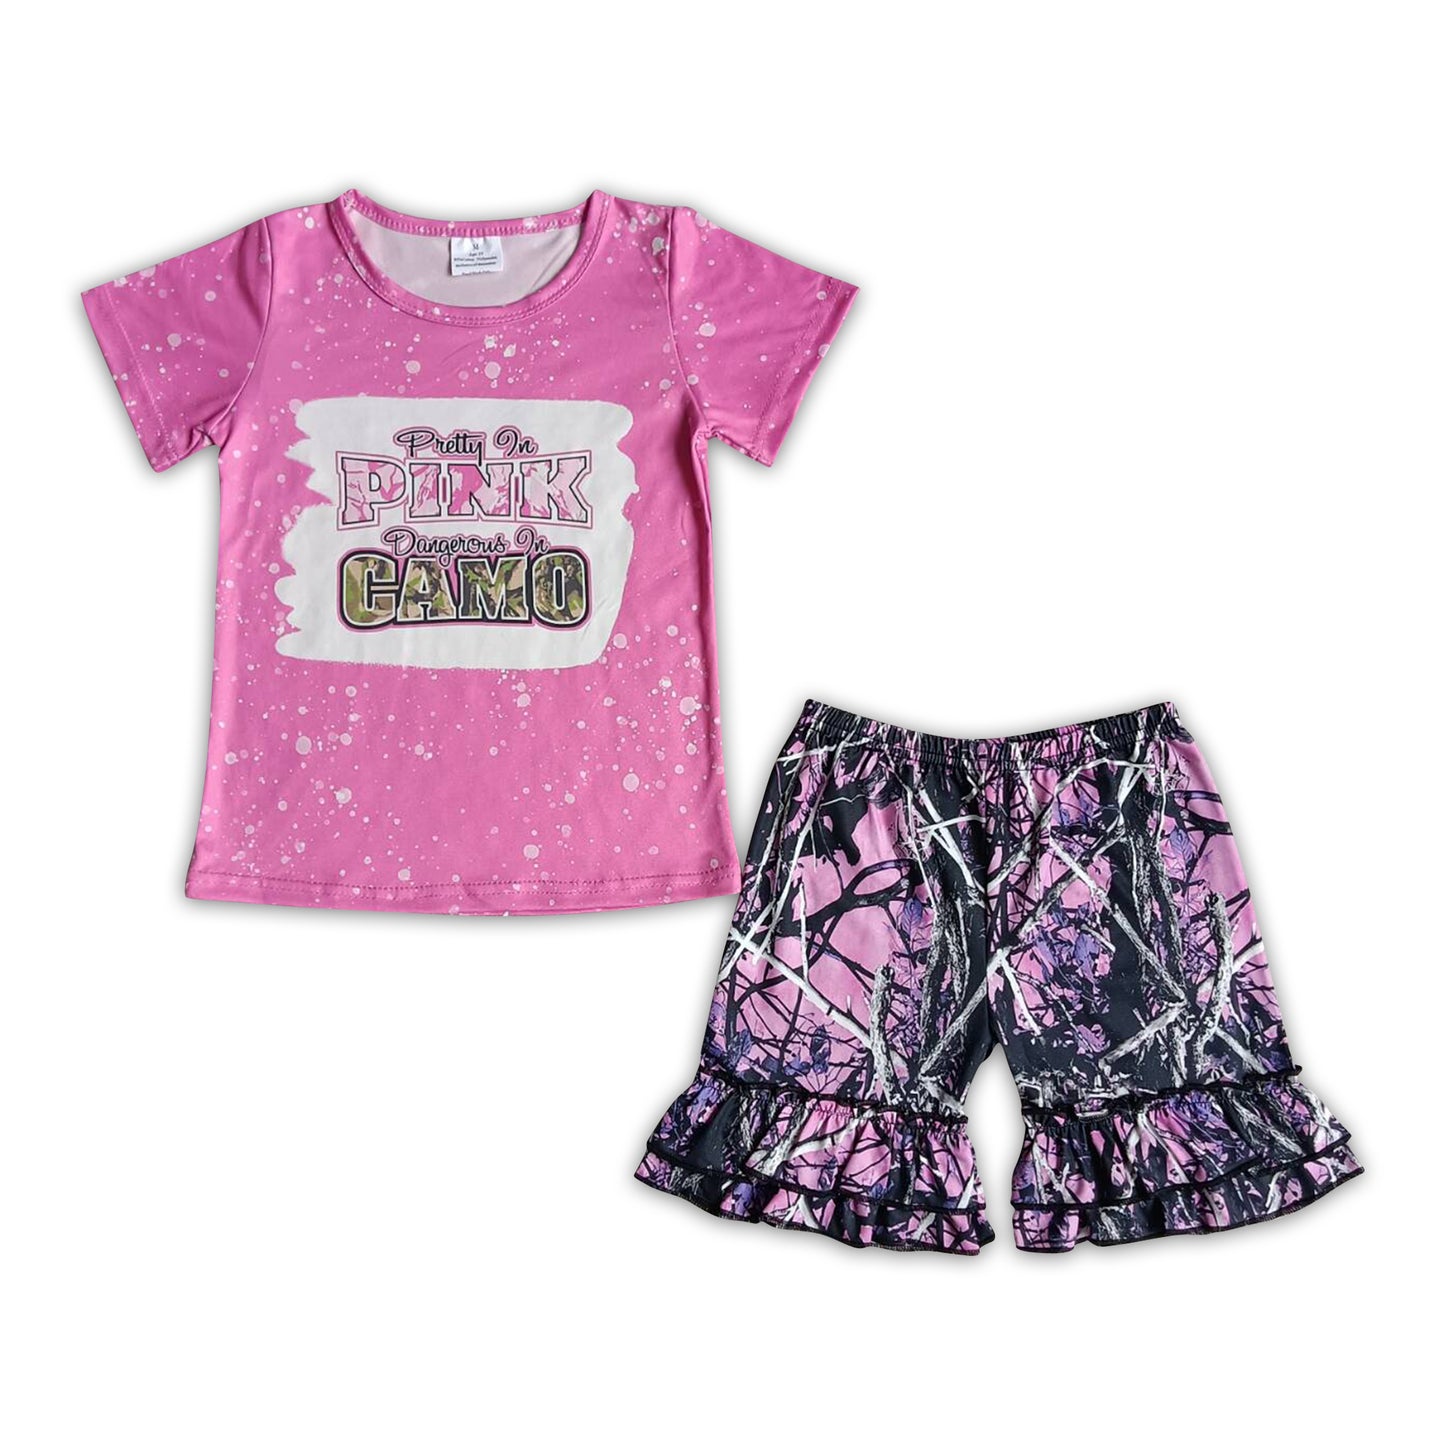 Girl Pink Camo Short Outfit